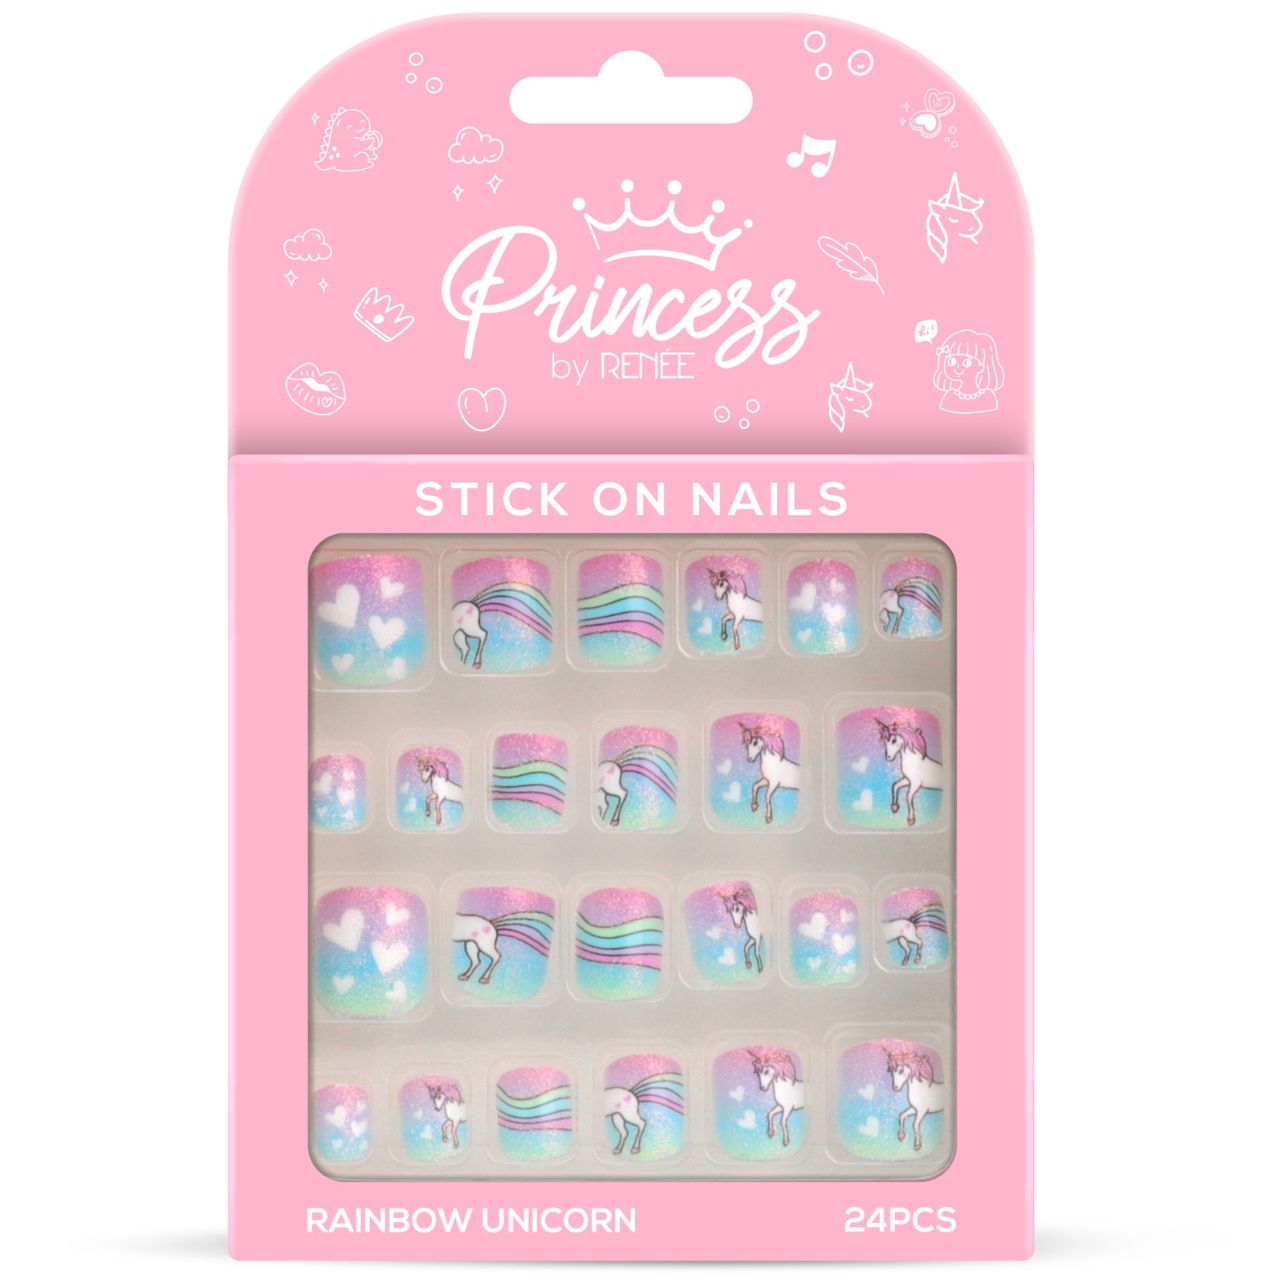 RENEE Princess Stick On Nails Pink Marble